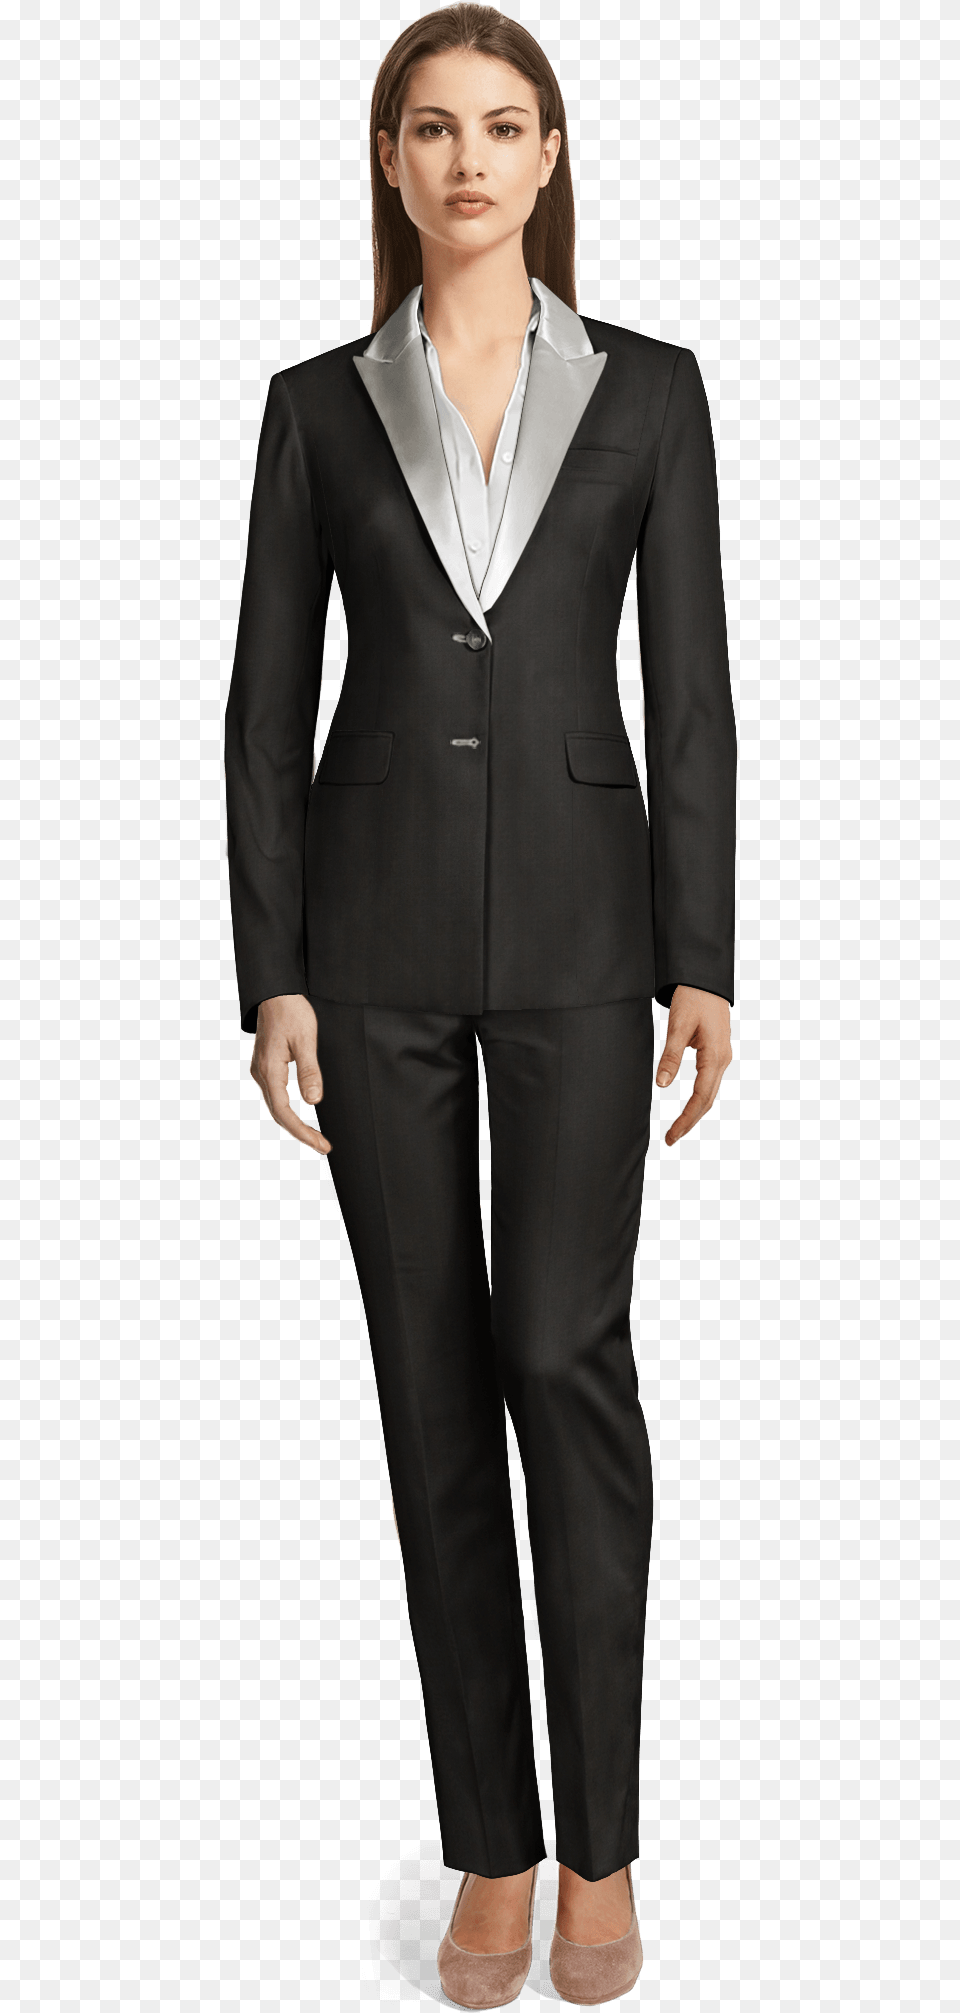 Black Polyester Tuxedo Formal Attire Whole Body, Clothing, Formal Wear, Suit, Coat Png